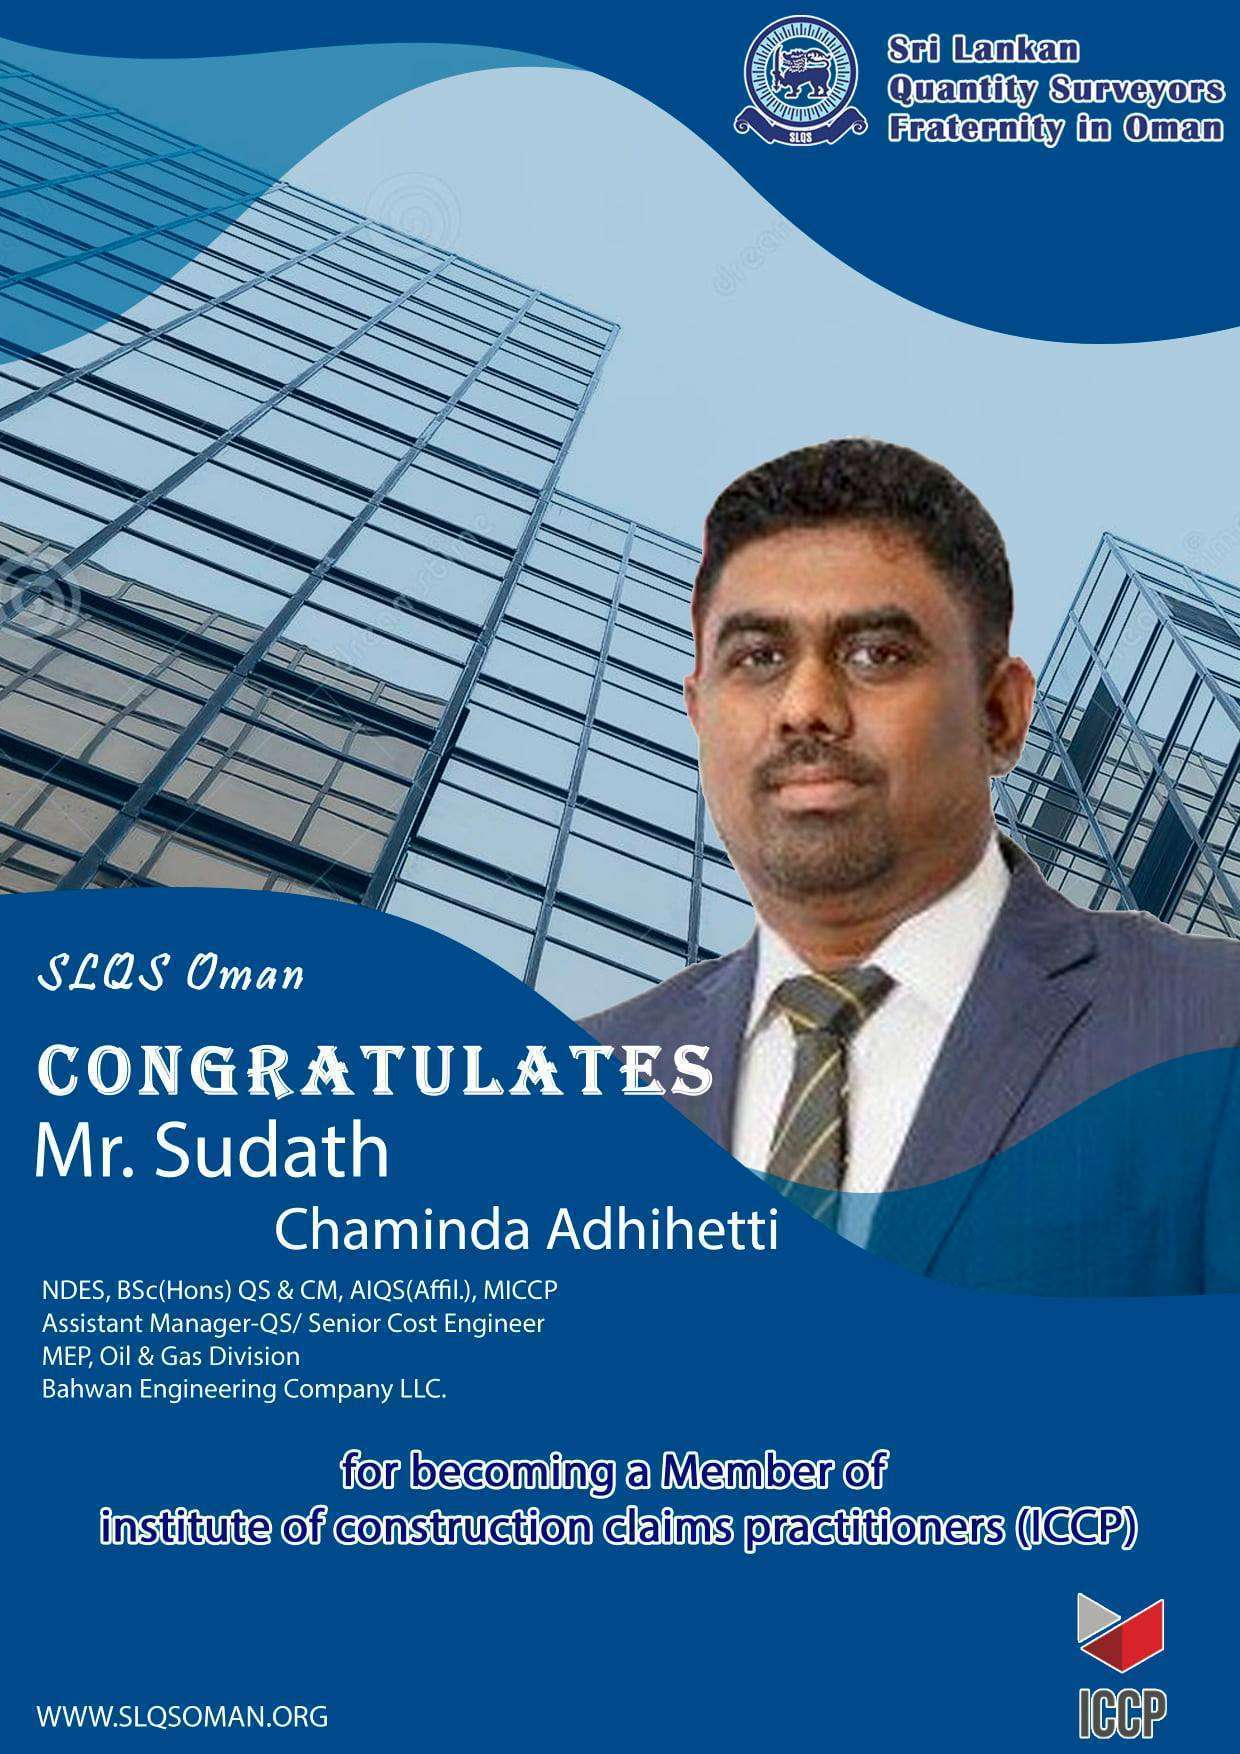 Congratulations!! Mr. Sudath chaminda Adhihetti !! For becoming a member of ICCP